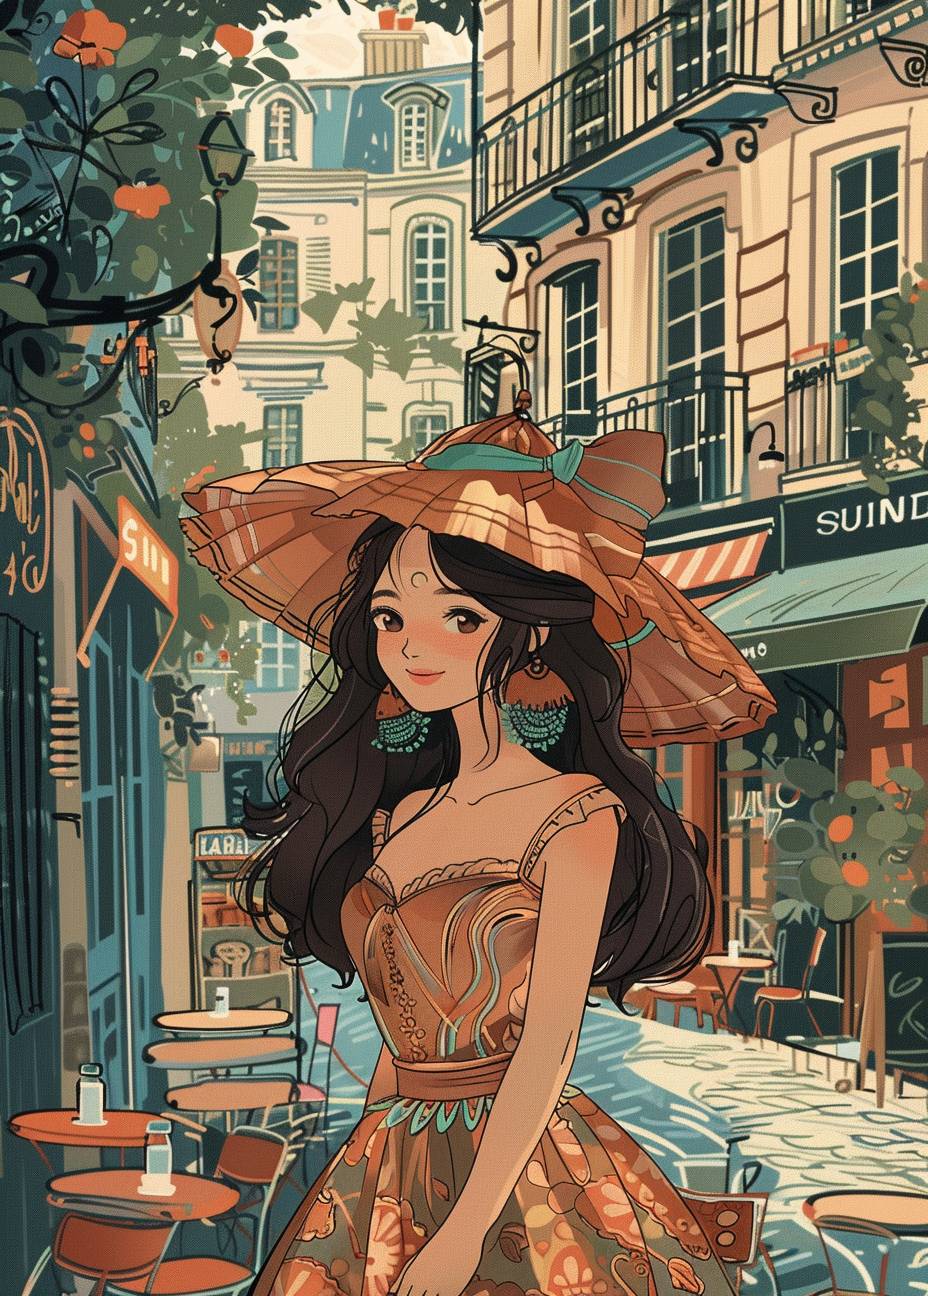 This is a cover illustration of a picture book in the style of Alphonse Mucha, depicting European streets in summer, a girl's daily life, cute, and colorful.